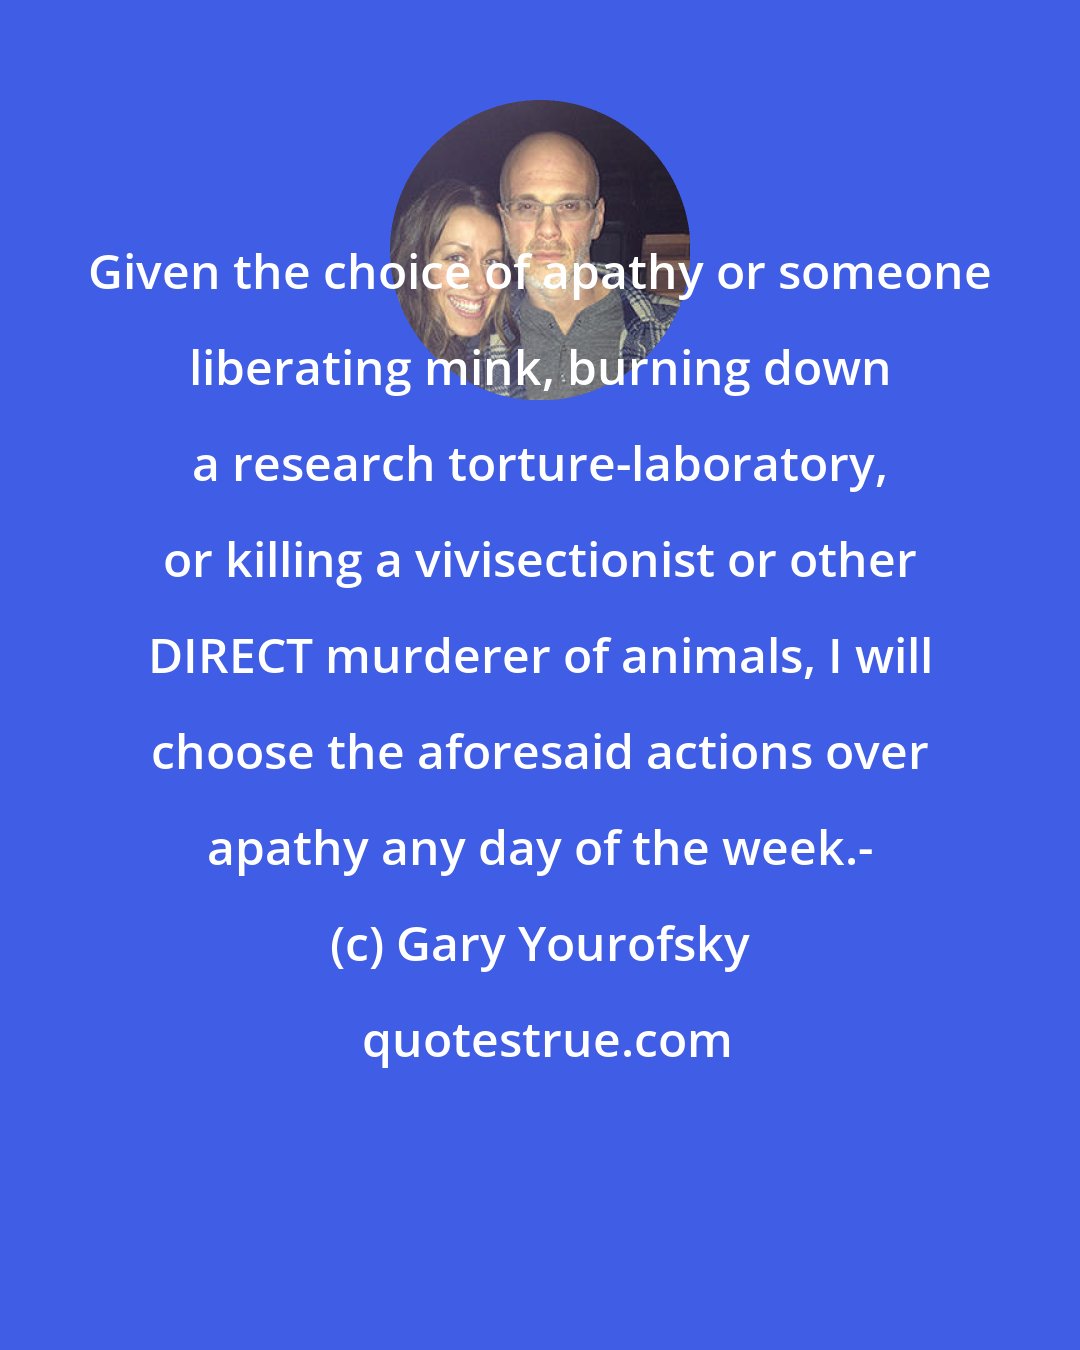 Gary Yourofsky: Given the choice of apathy or someone liberating mink, burning down a research torture-laboratory, or killing a vivisectionist or other DIRECT murderer of animals, I will choose the aforesaid actions over apathy any day of the week.-